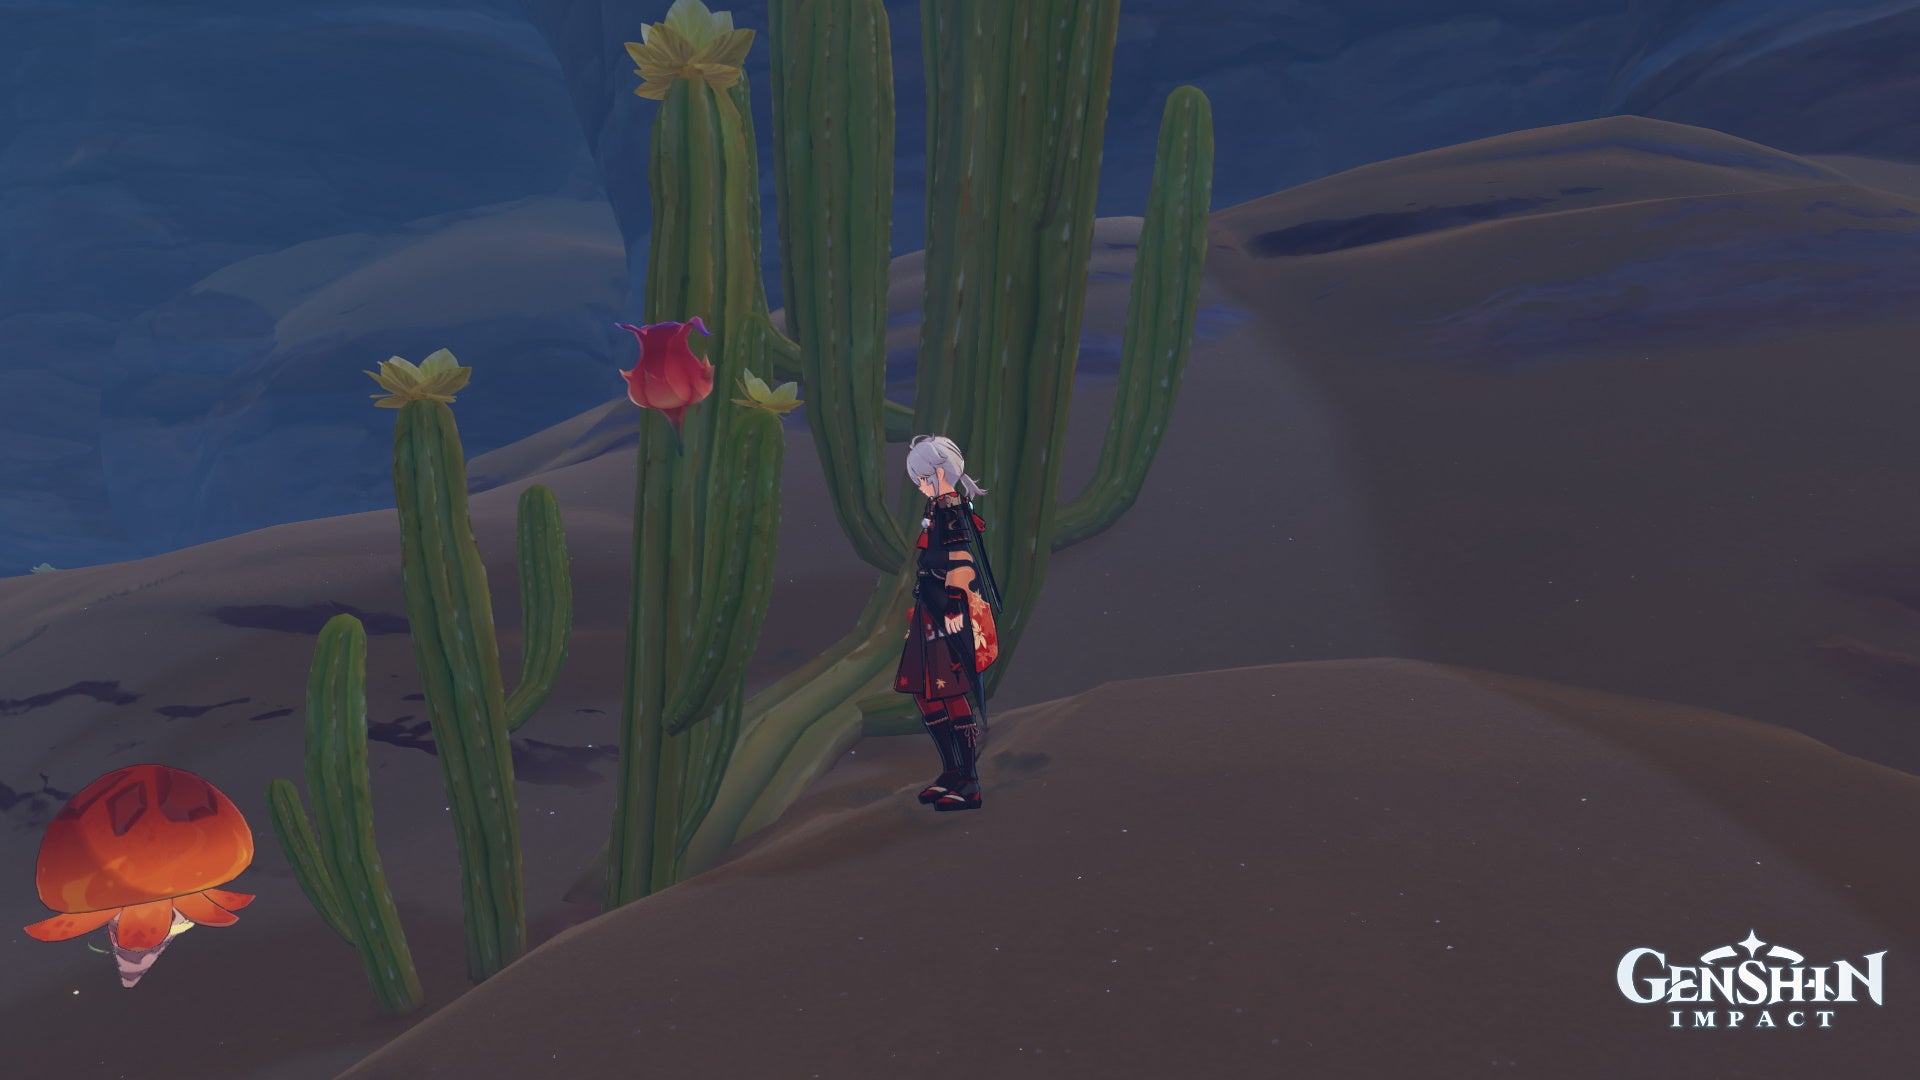 Genshin Impact Redcrest locations: An anime man with silver hair looks at a red fruit on a cactus plant